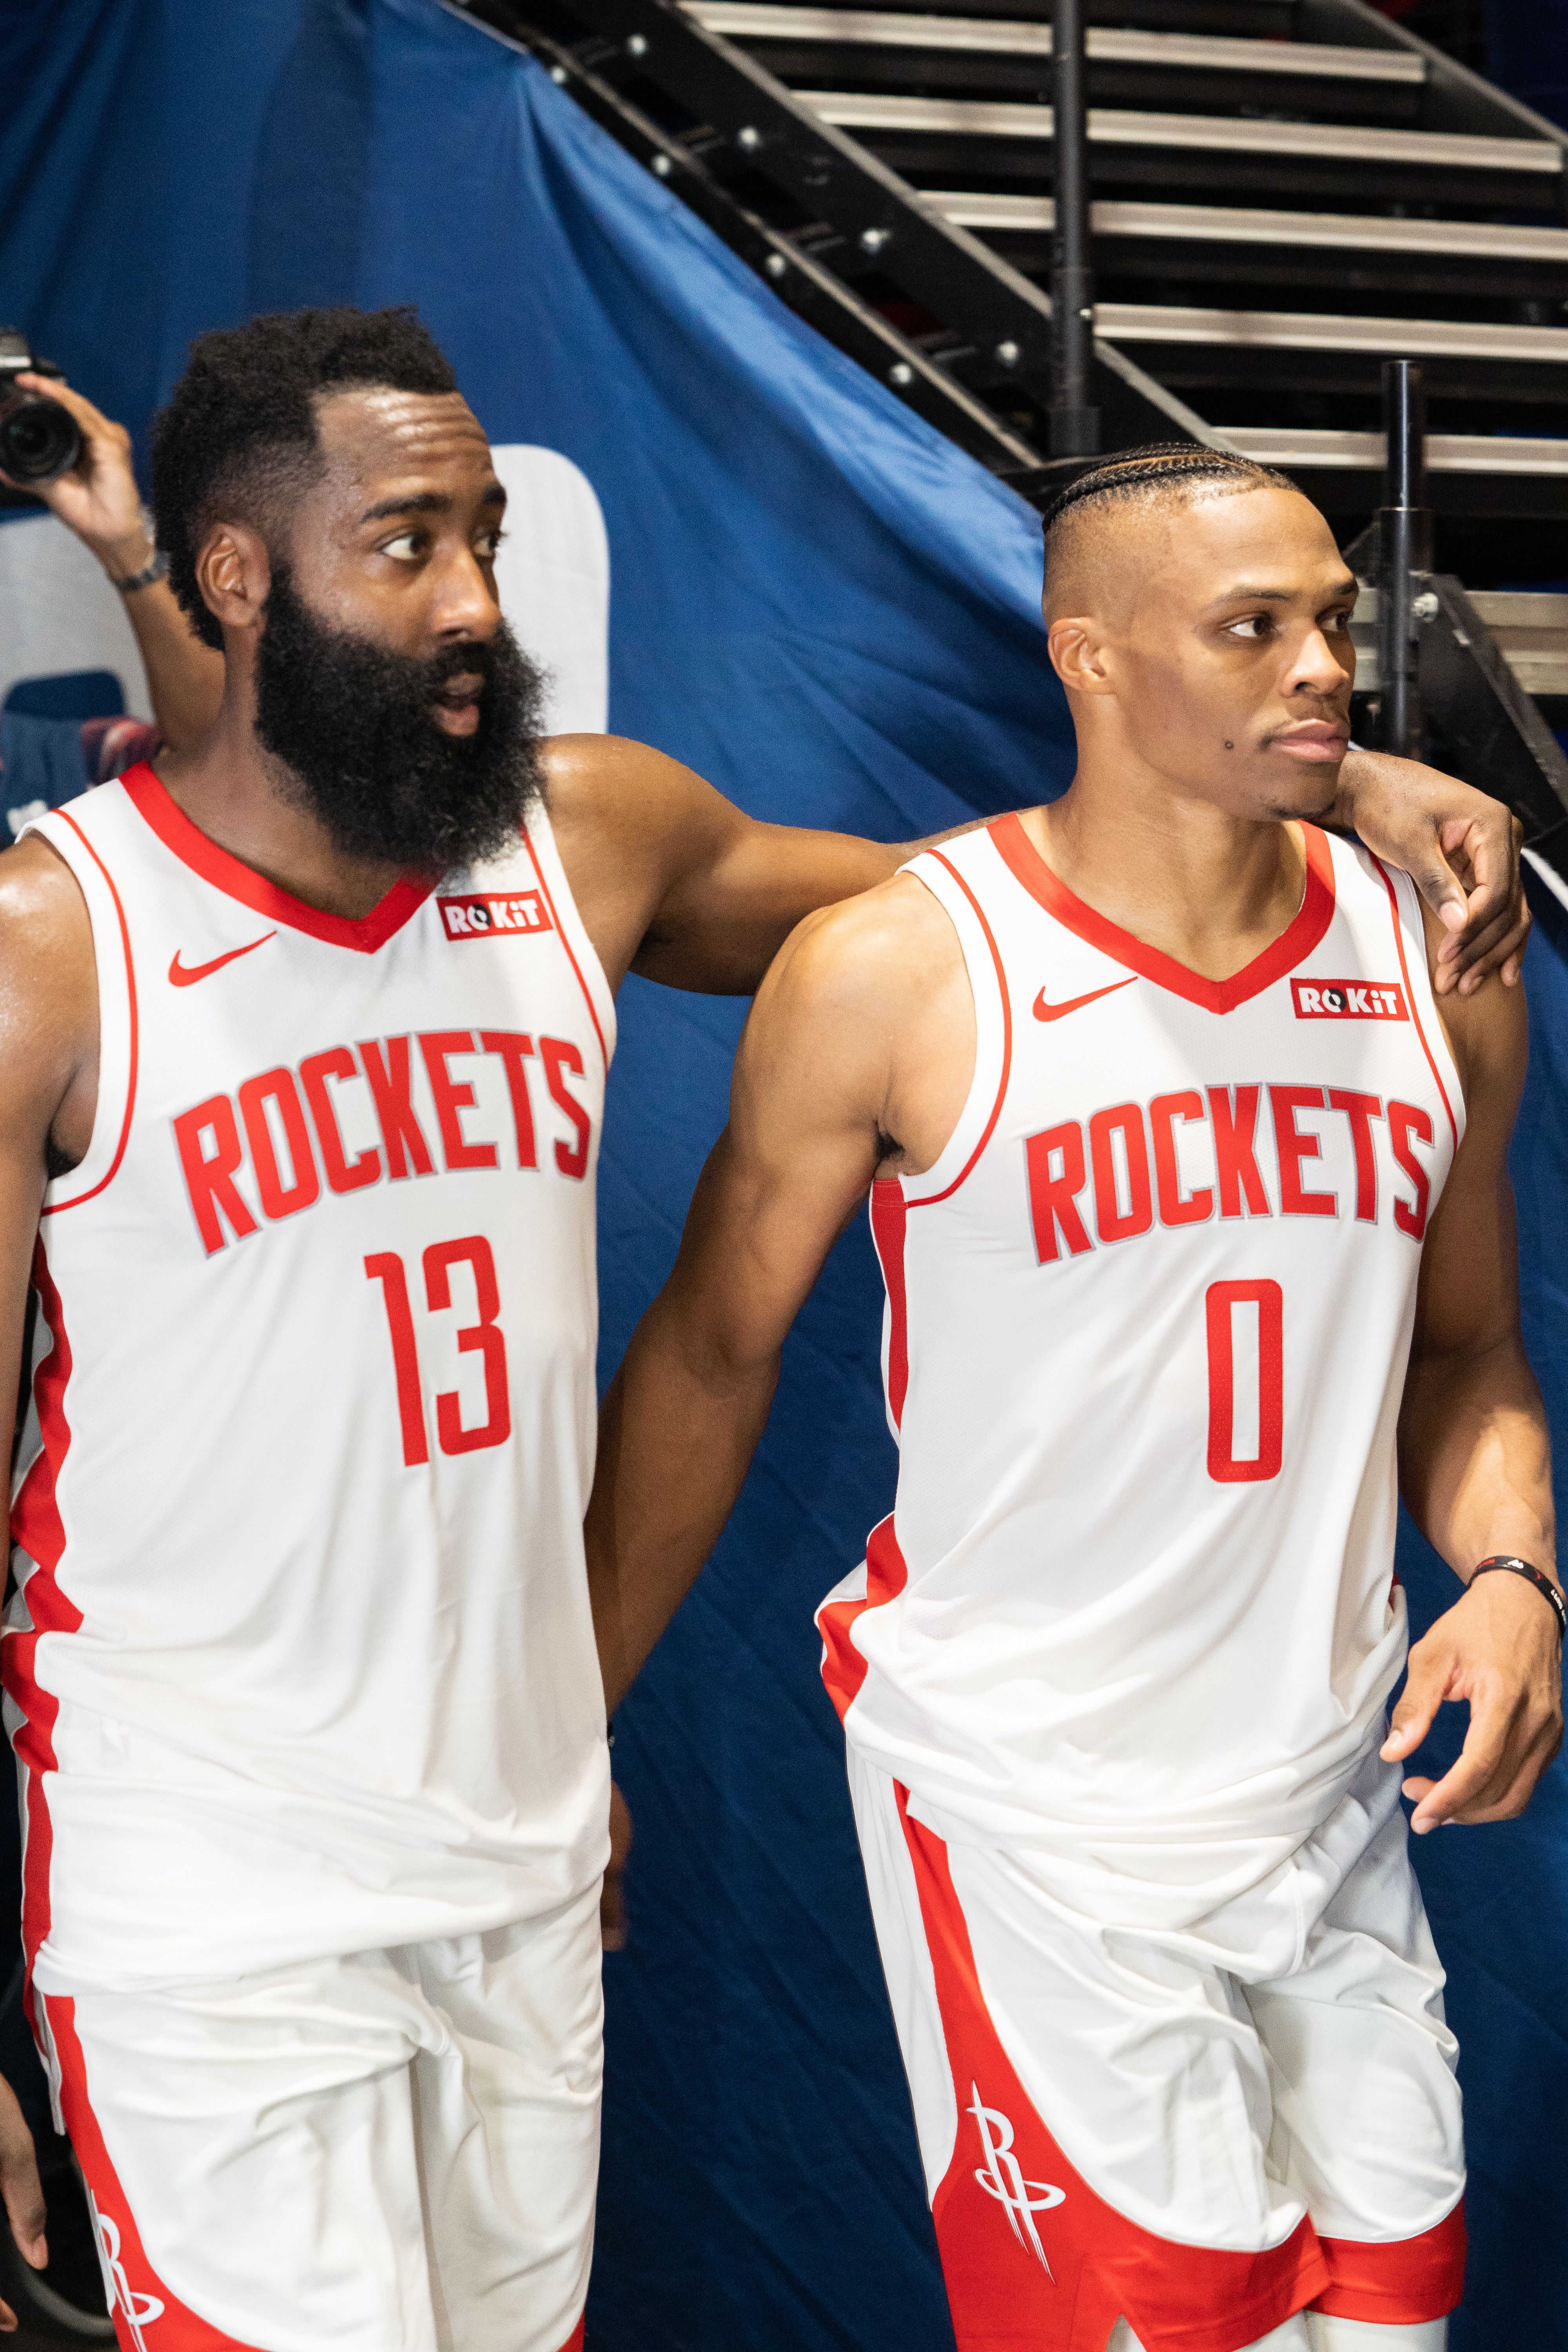 Russell Westbrook and James Harden walking into the arena.